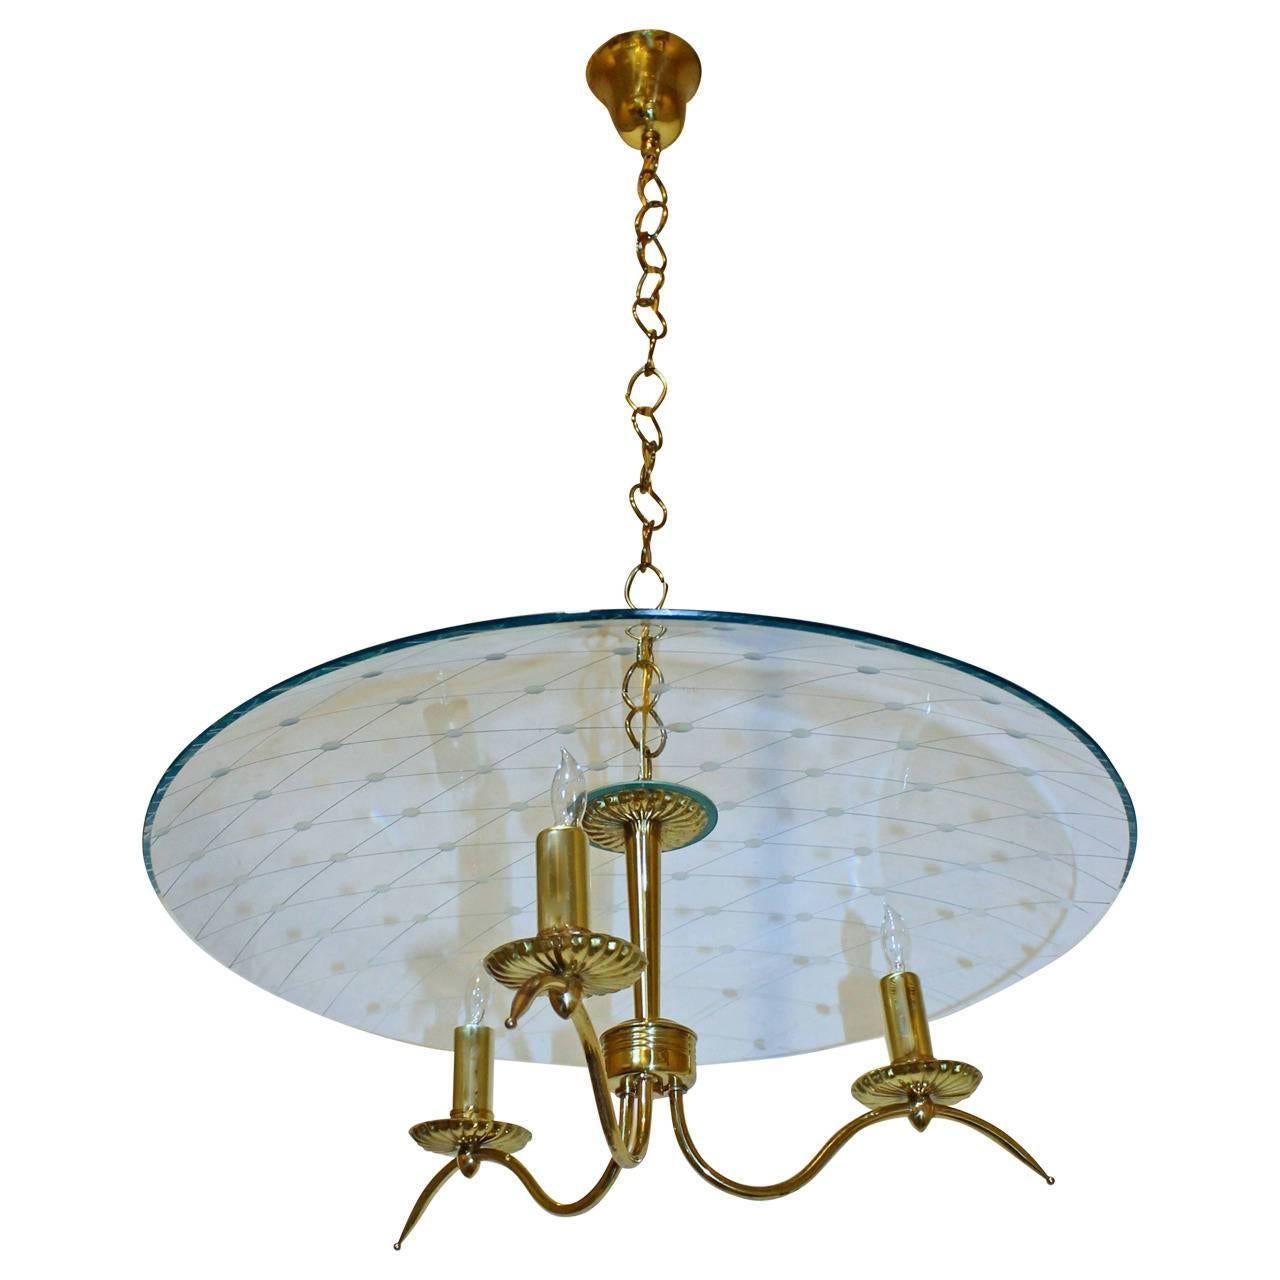 Exquisite Italian Fontana Arte Style Brass Etched Glass Chandelier For Sale 2